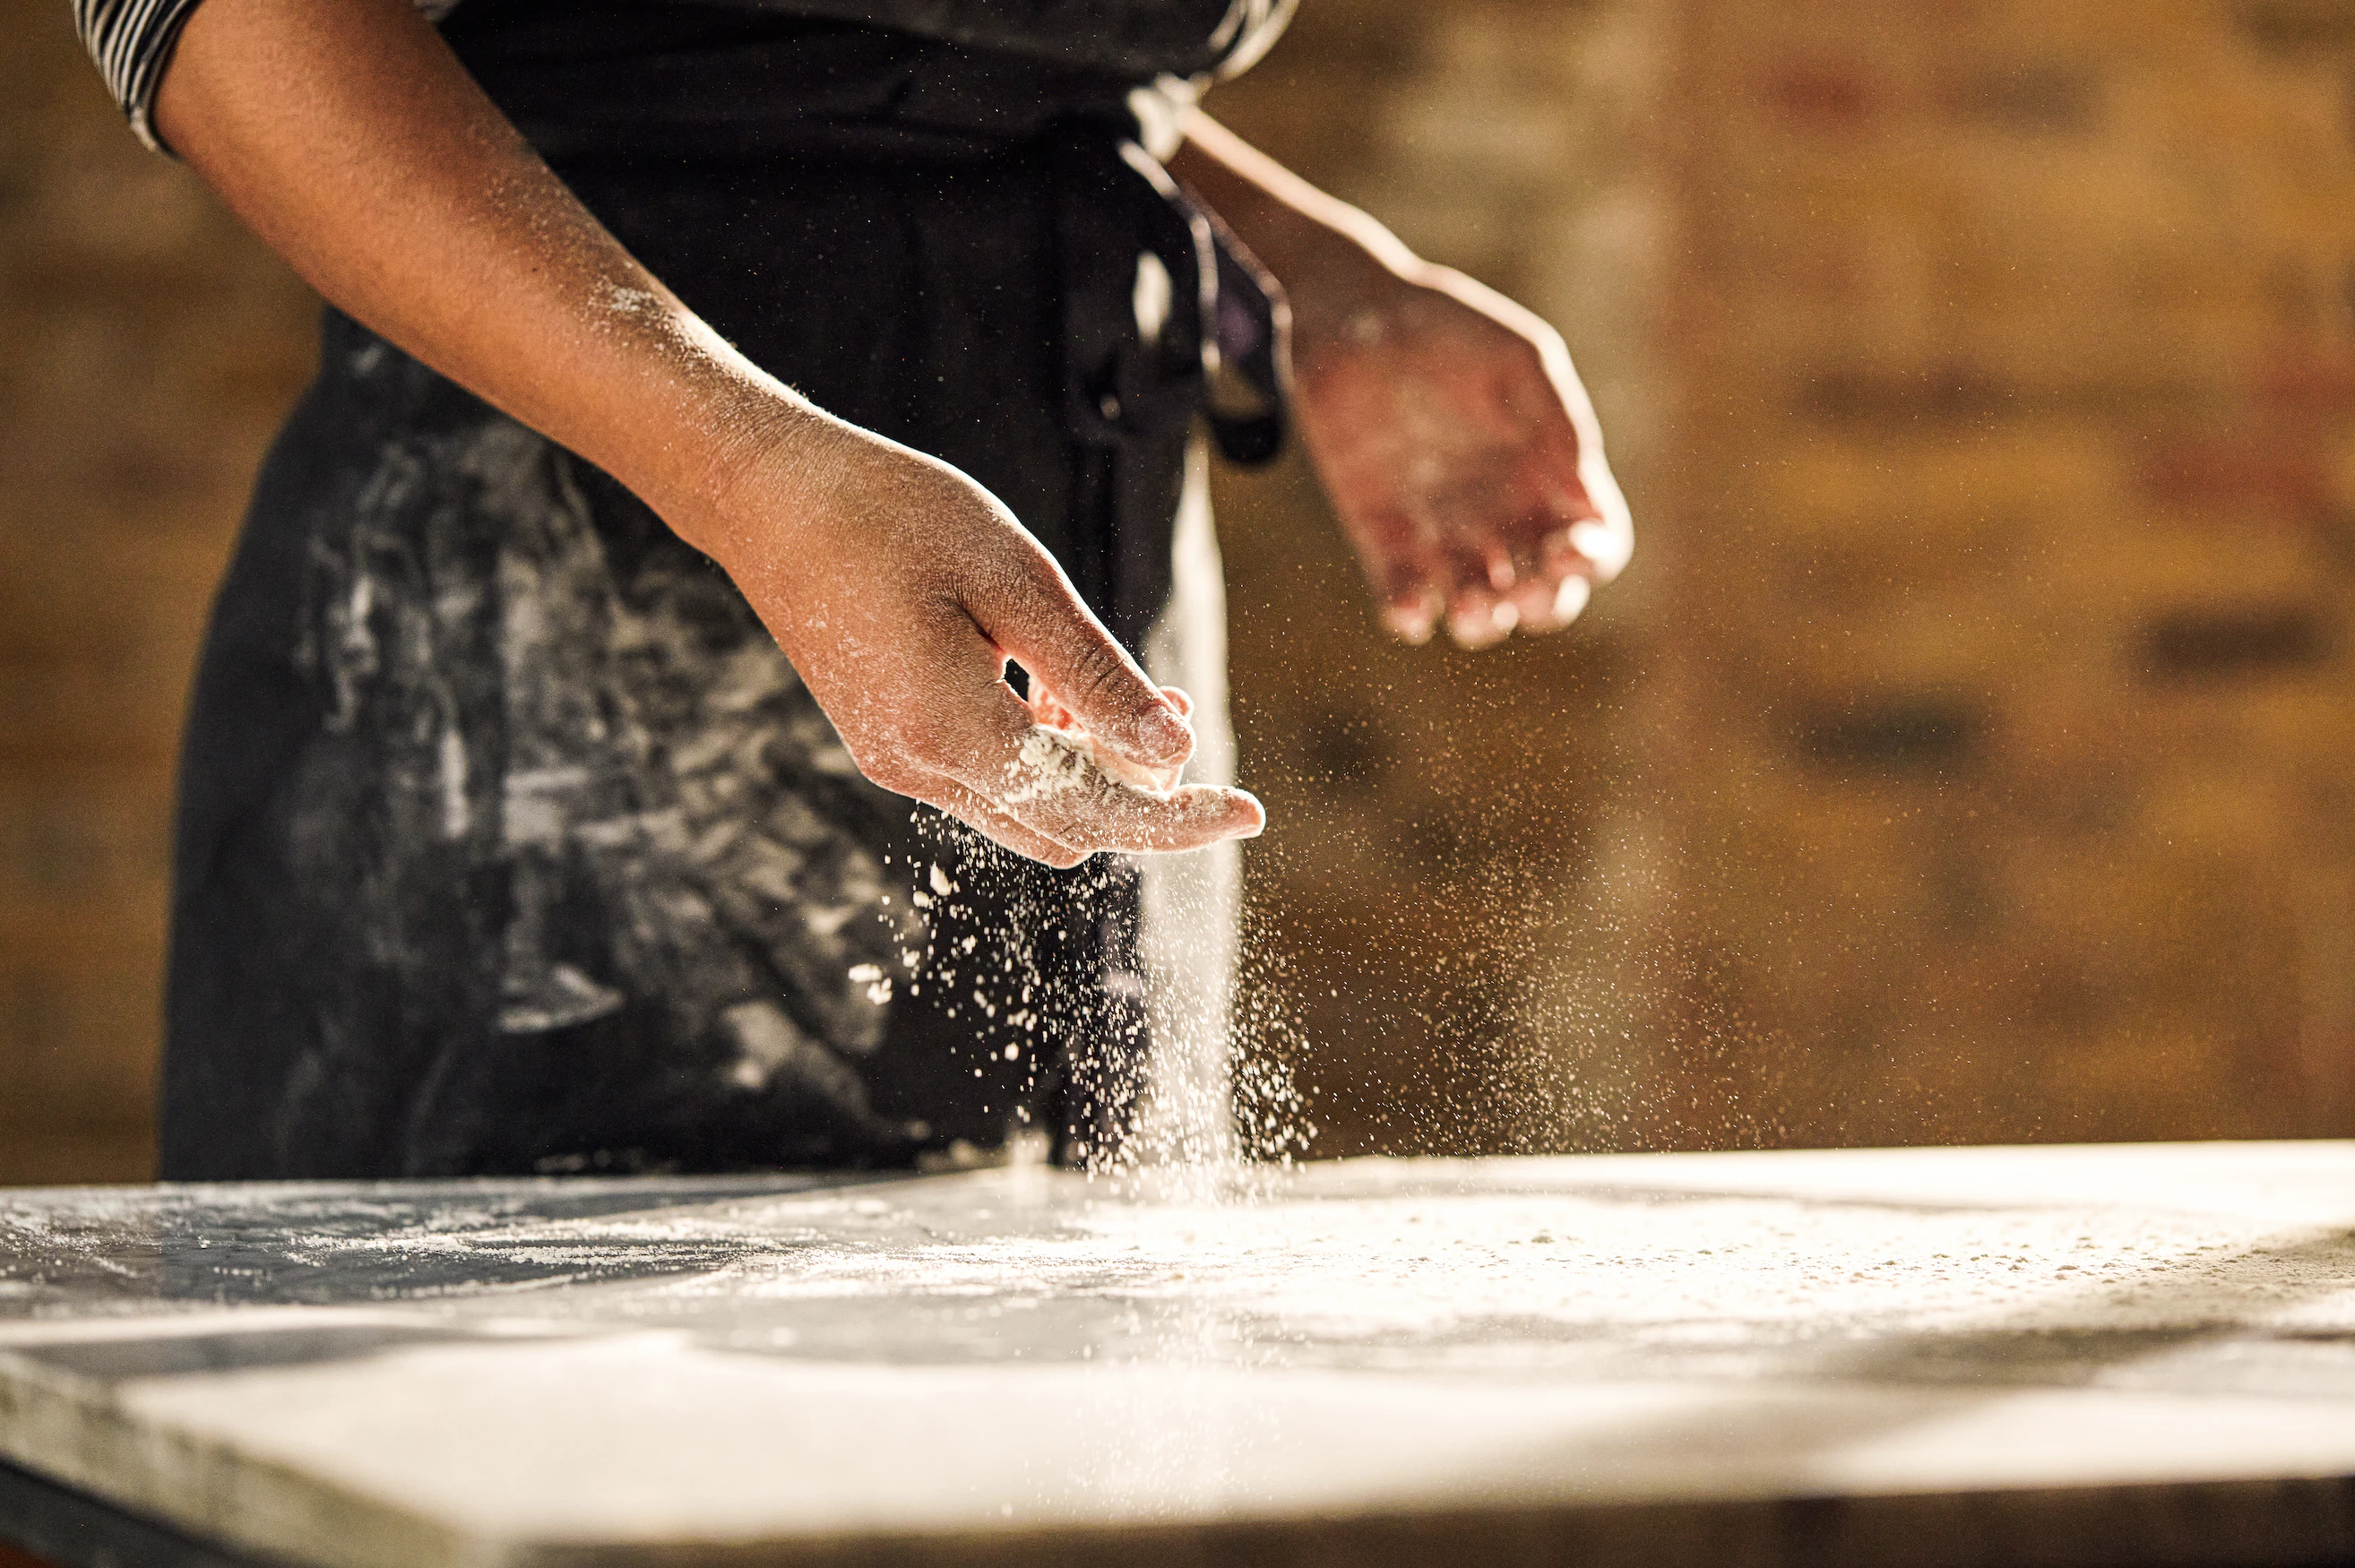 Someone in an apron scattering flour on a marble surface.